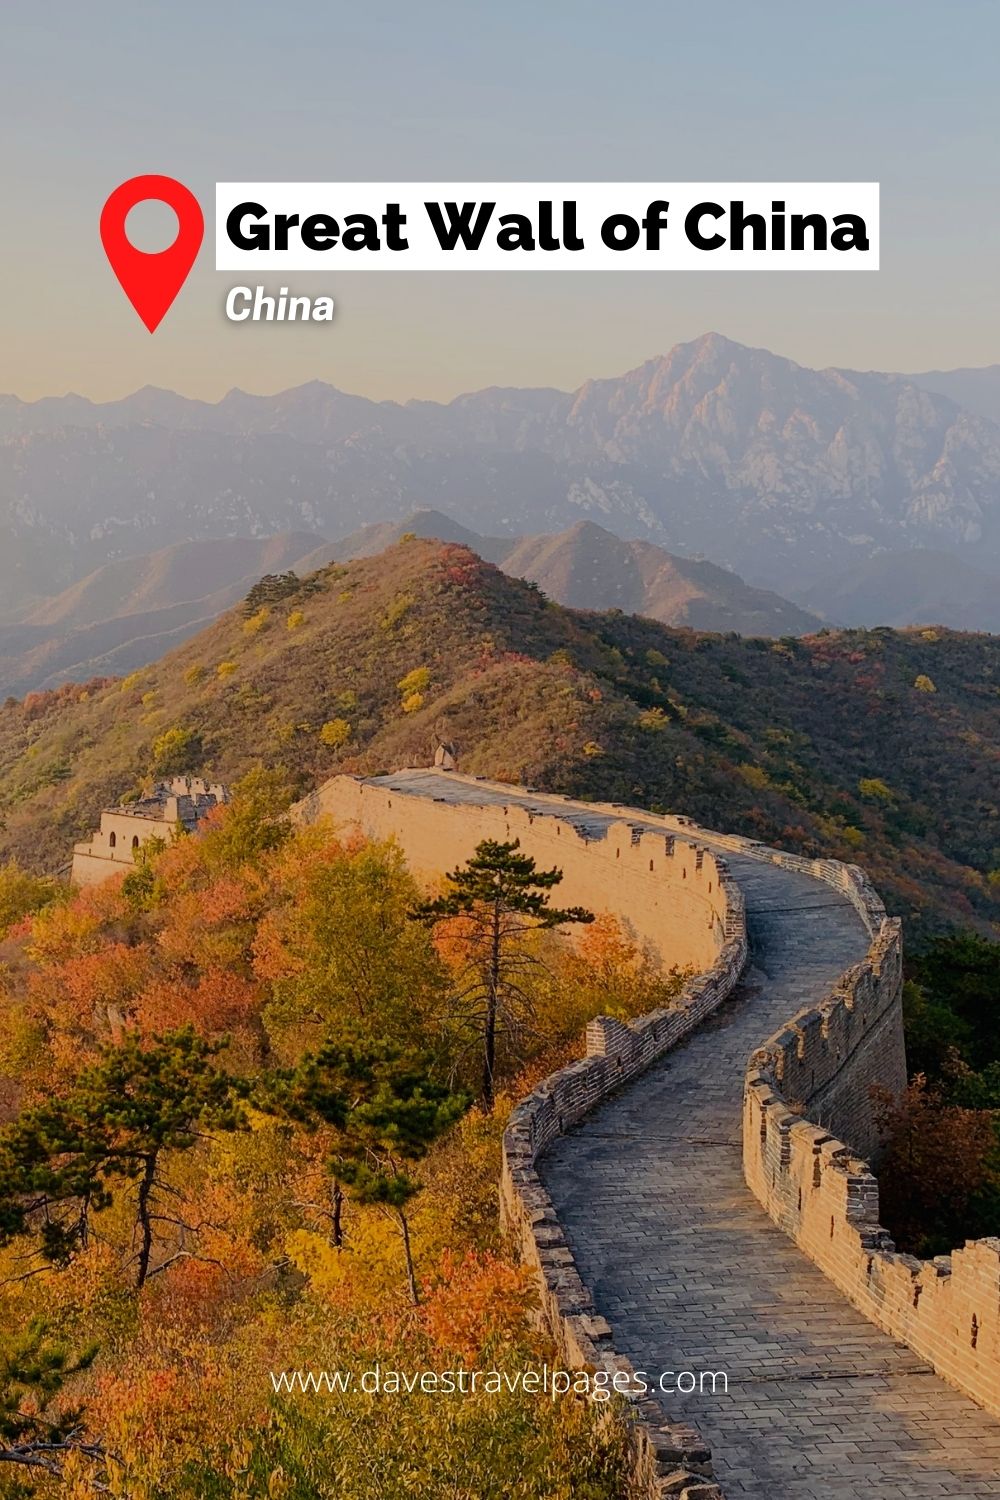 The Great Wall Of China is perhaps the biggest landmark in Asia